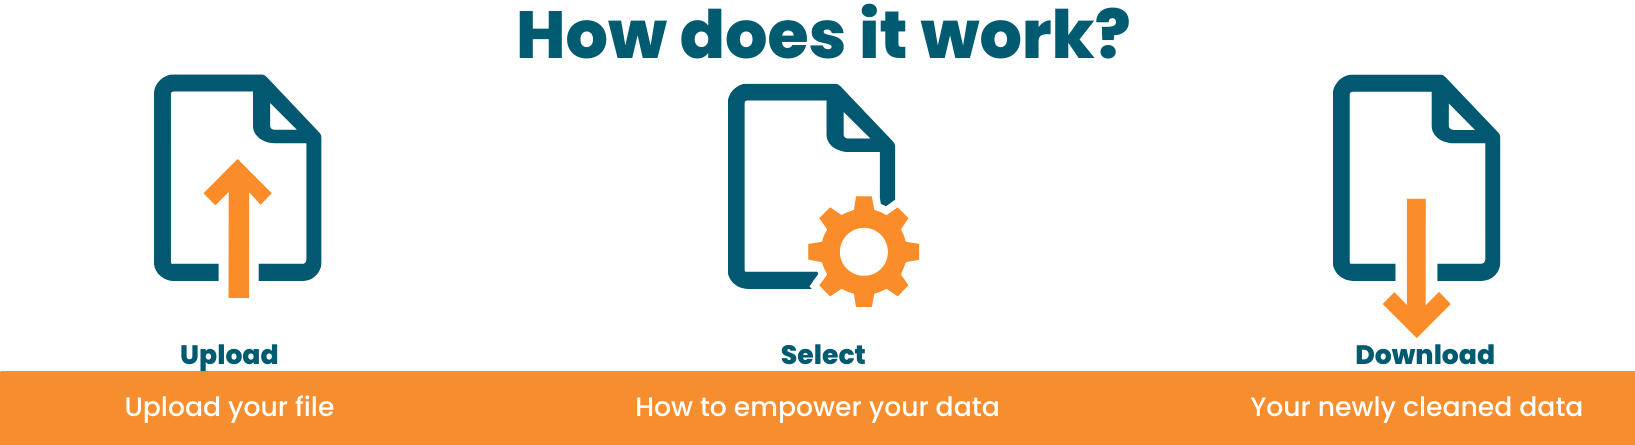 Upload your file, select how you want to enhance it, then download your new file with fixed and enhanced data!